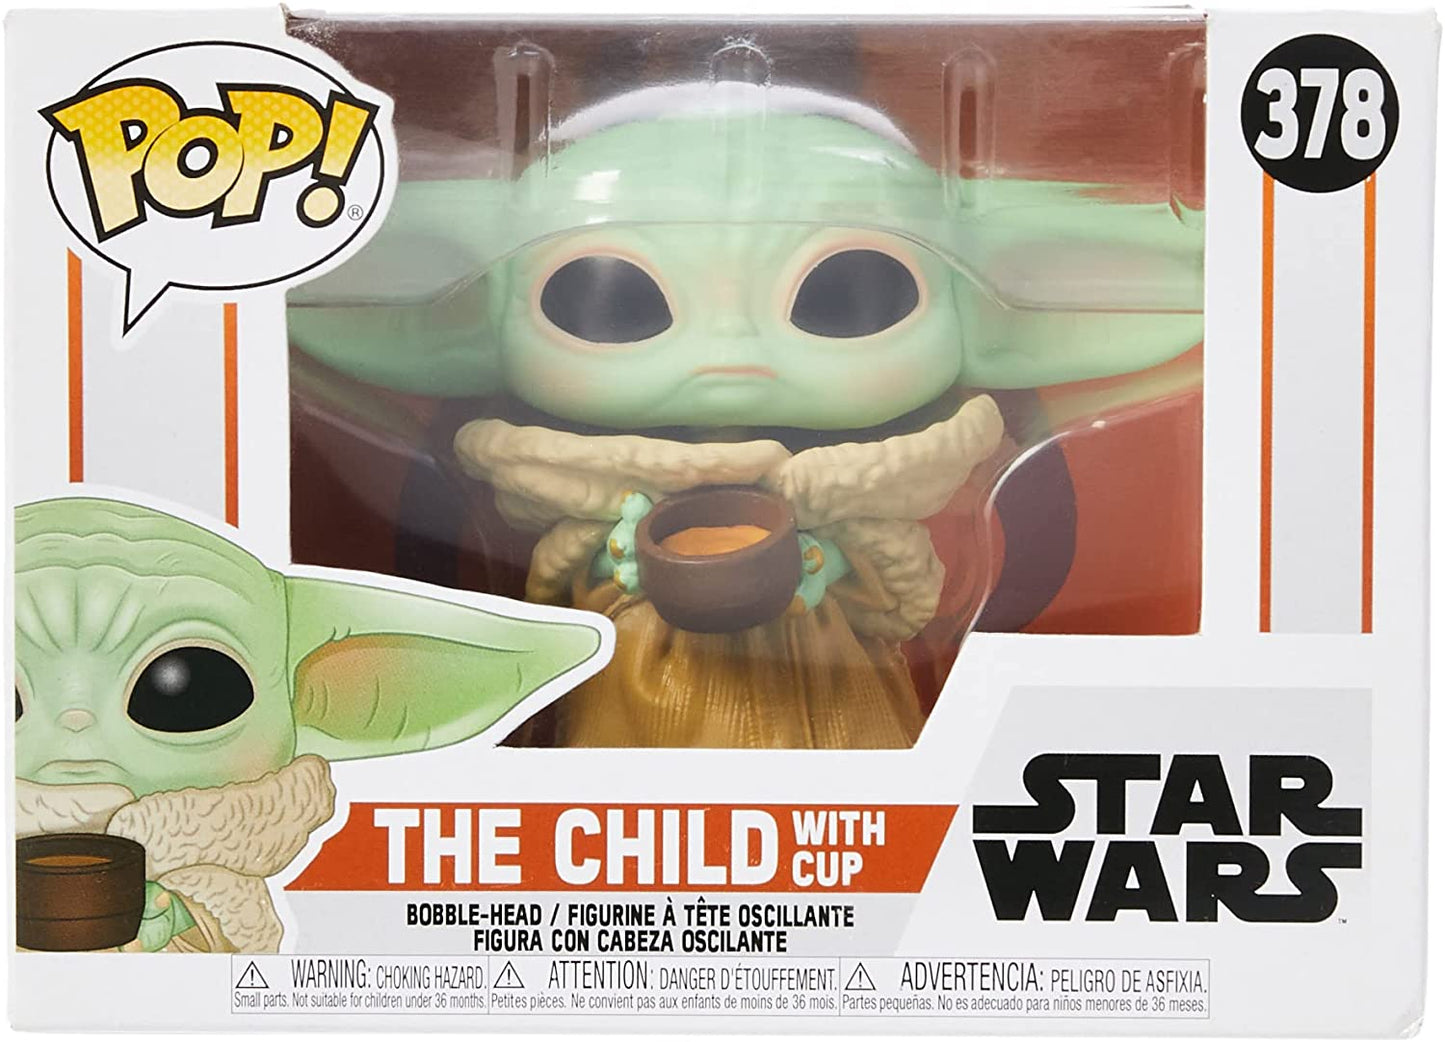 STAR WARS THE MANDALORIAN THE CHILD WITH CUP #378 POP